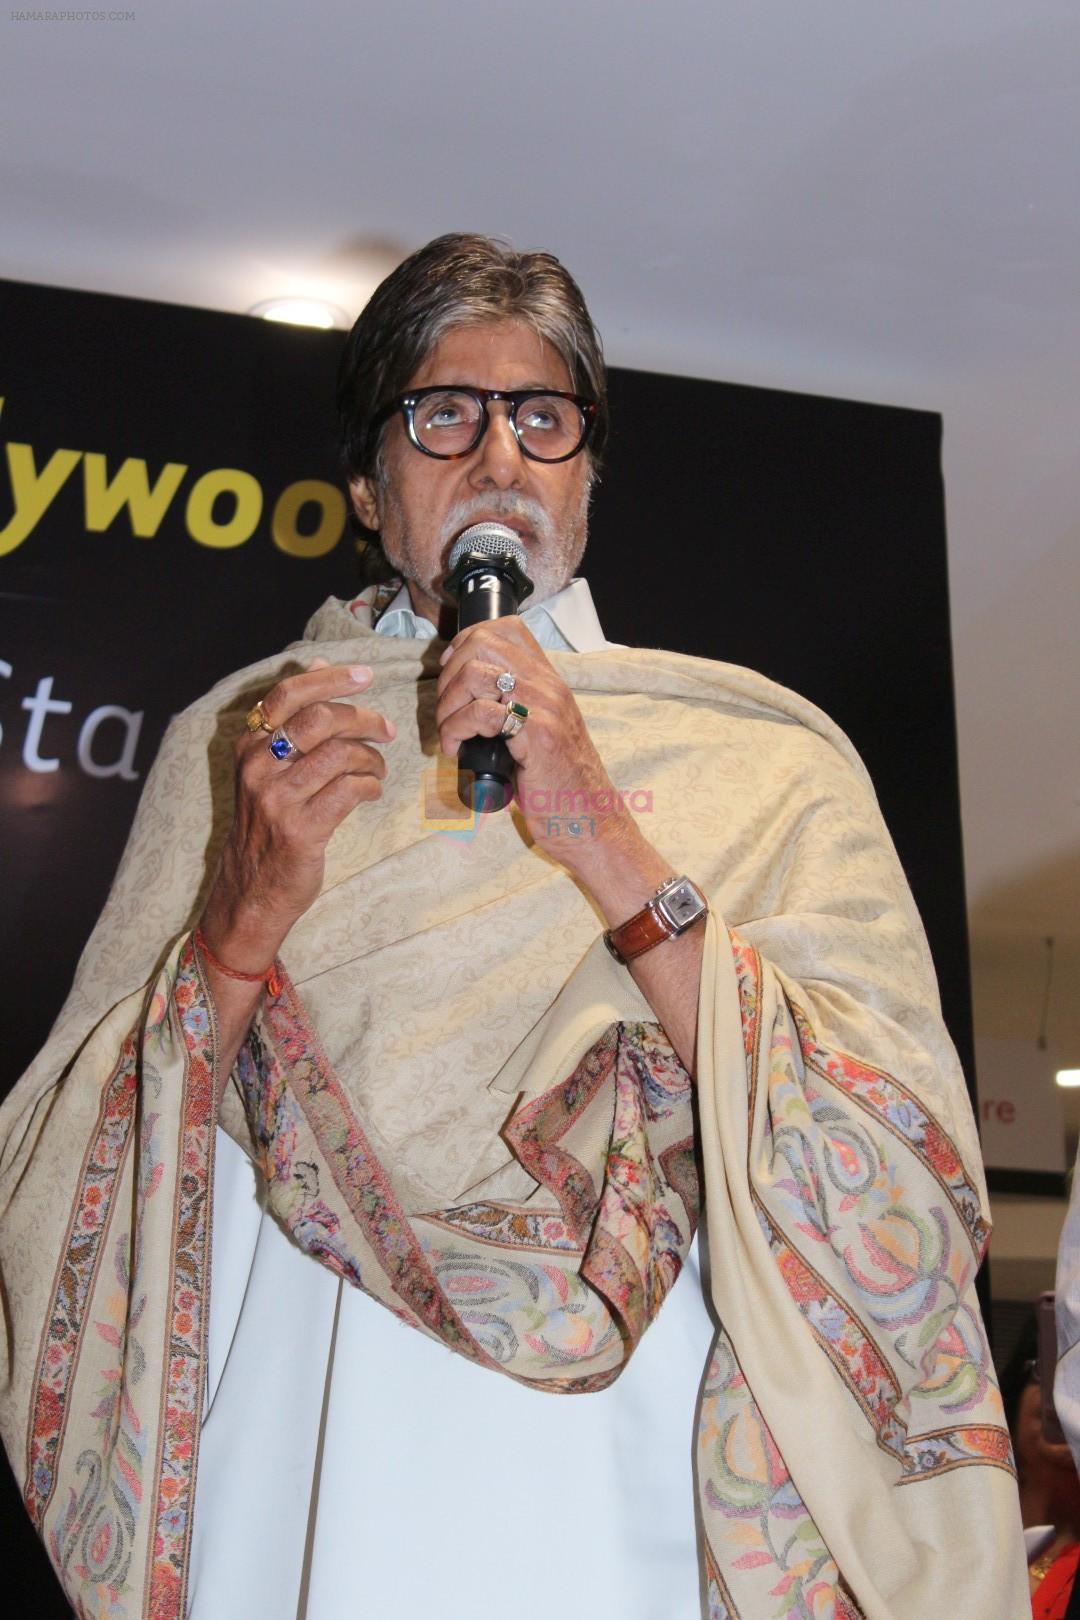 Amitabh Bachchan at the Launch Of Bollywood The Book on 2nd Dec 2017